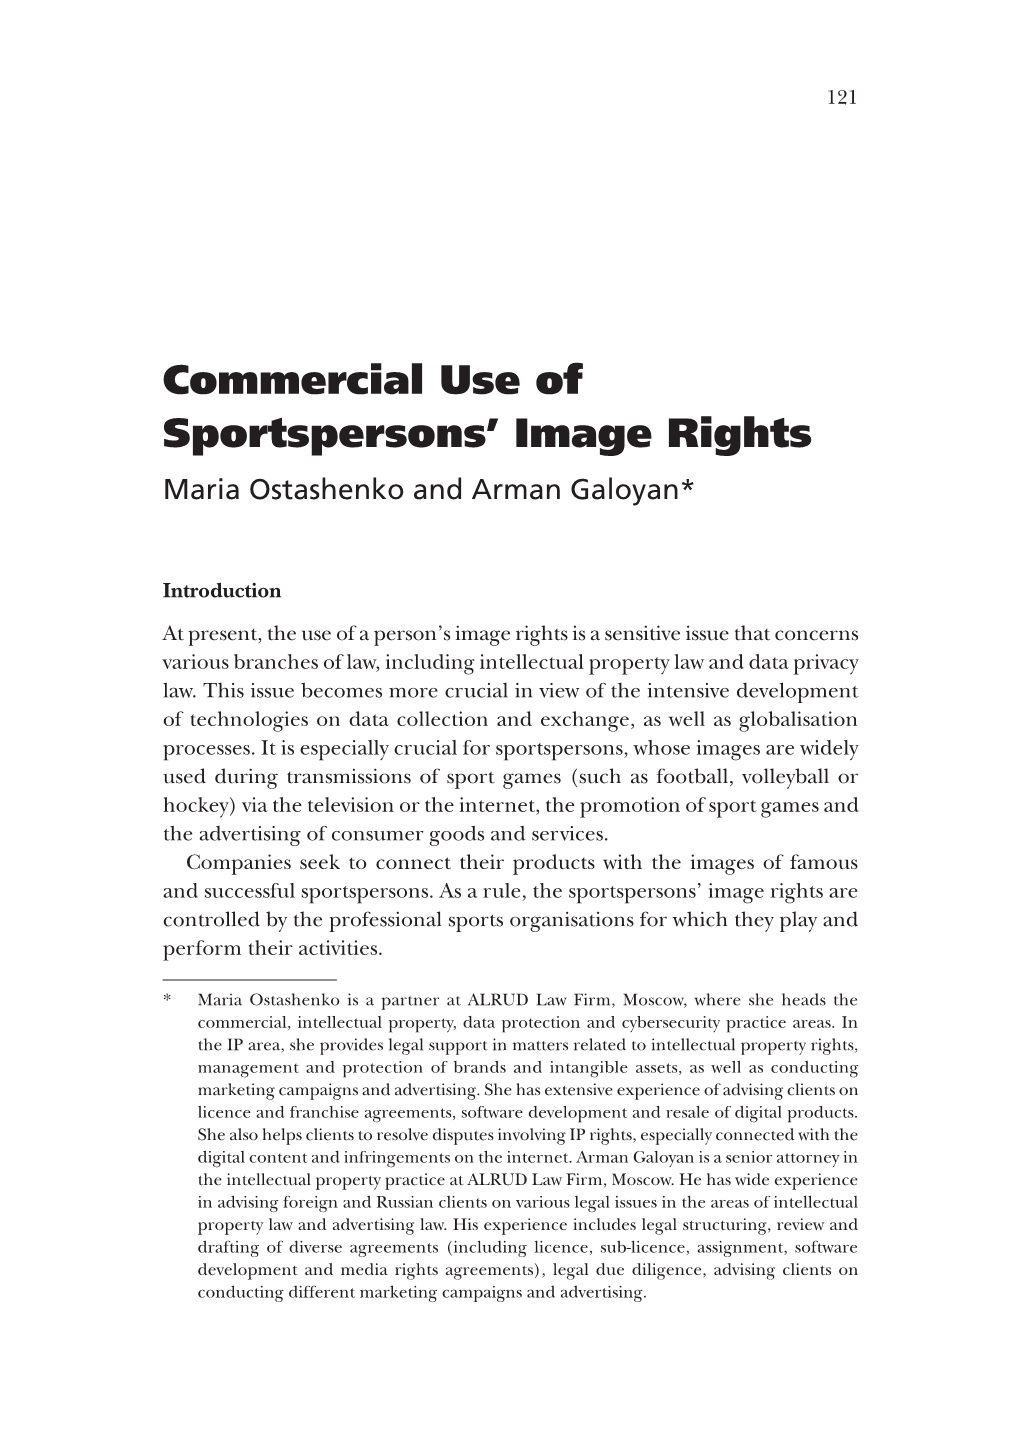 Commercial Use of Sportspersons' Image Rights